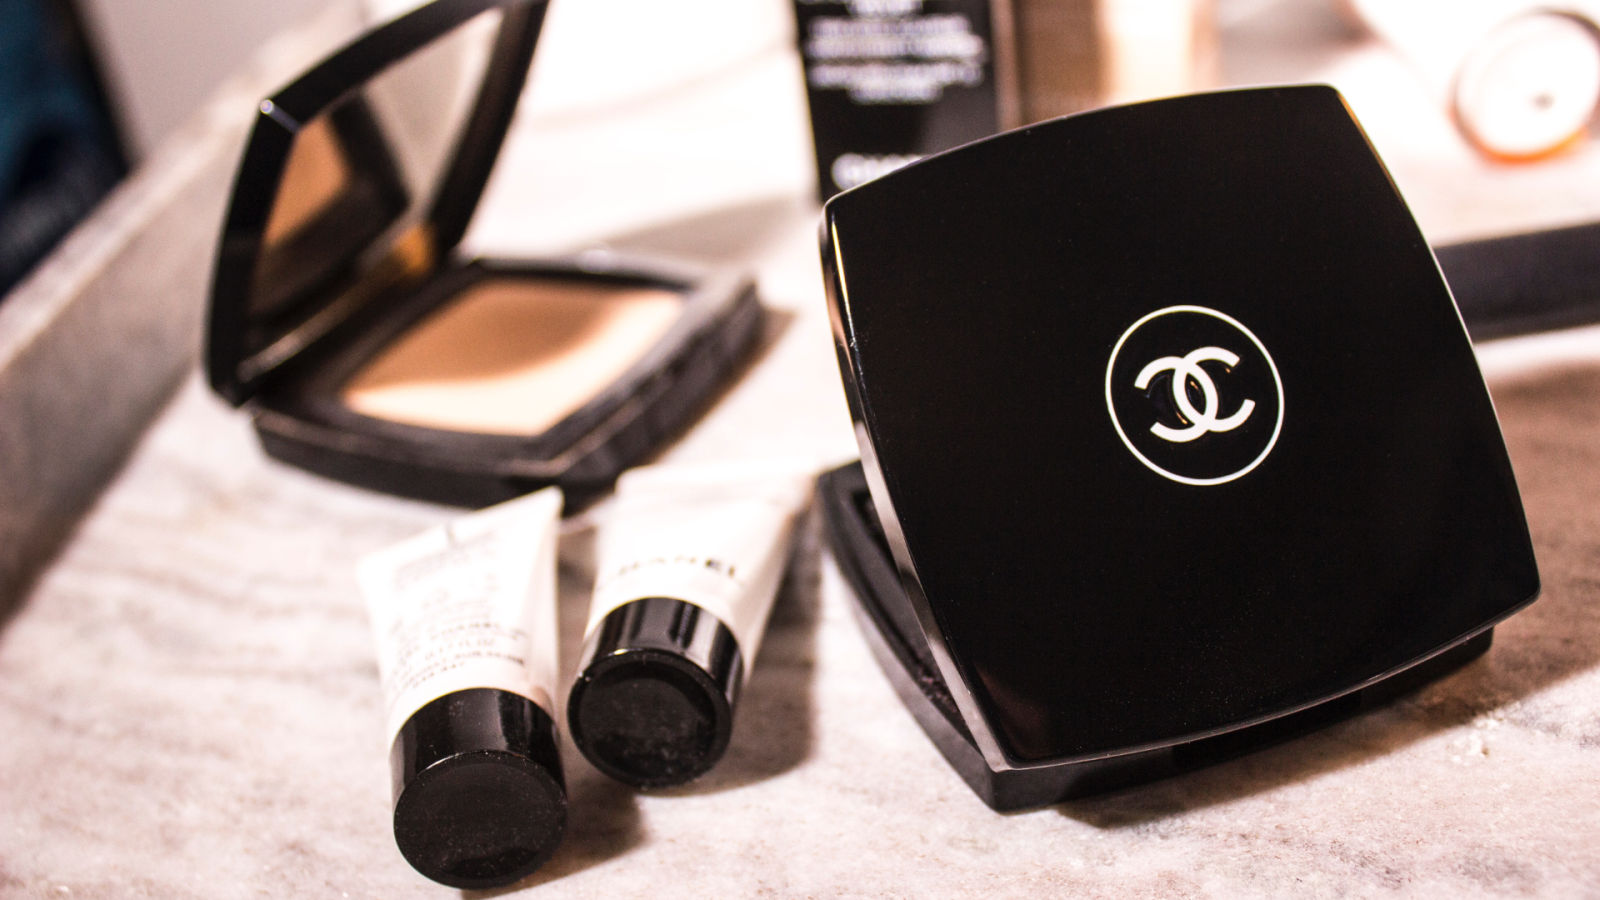 Cushion foundation: The beauty must-have for on-the-go glamour